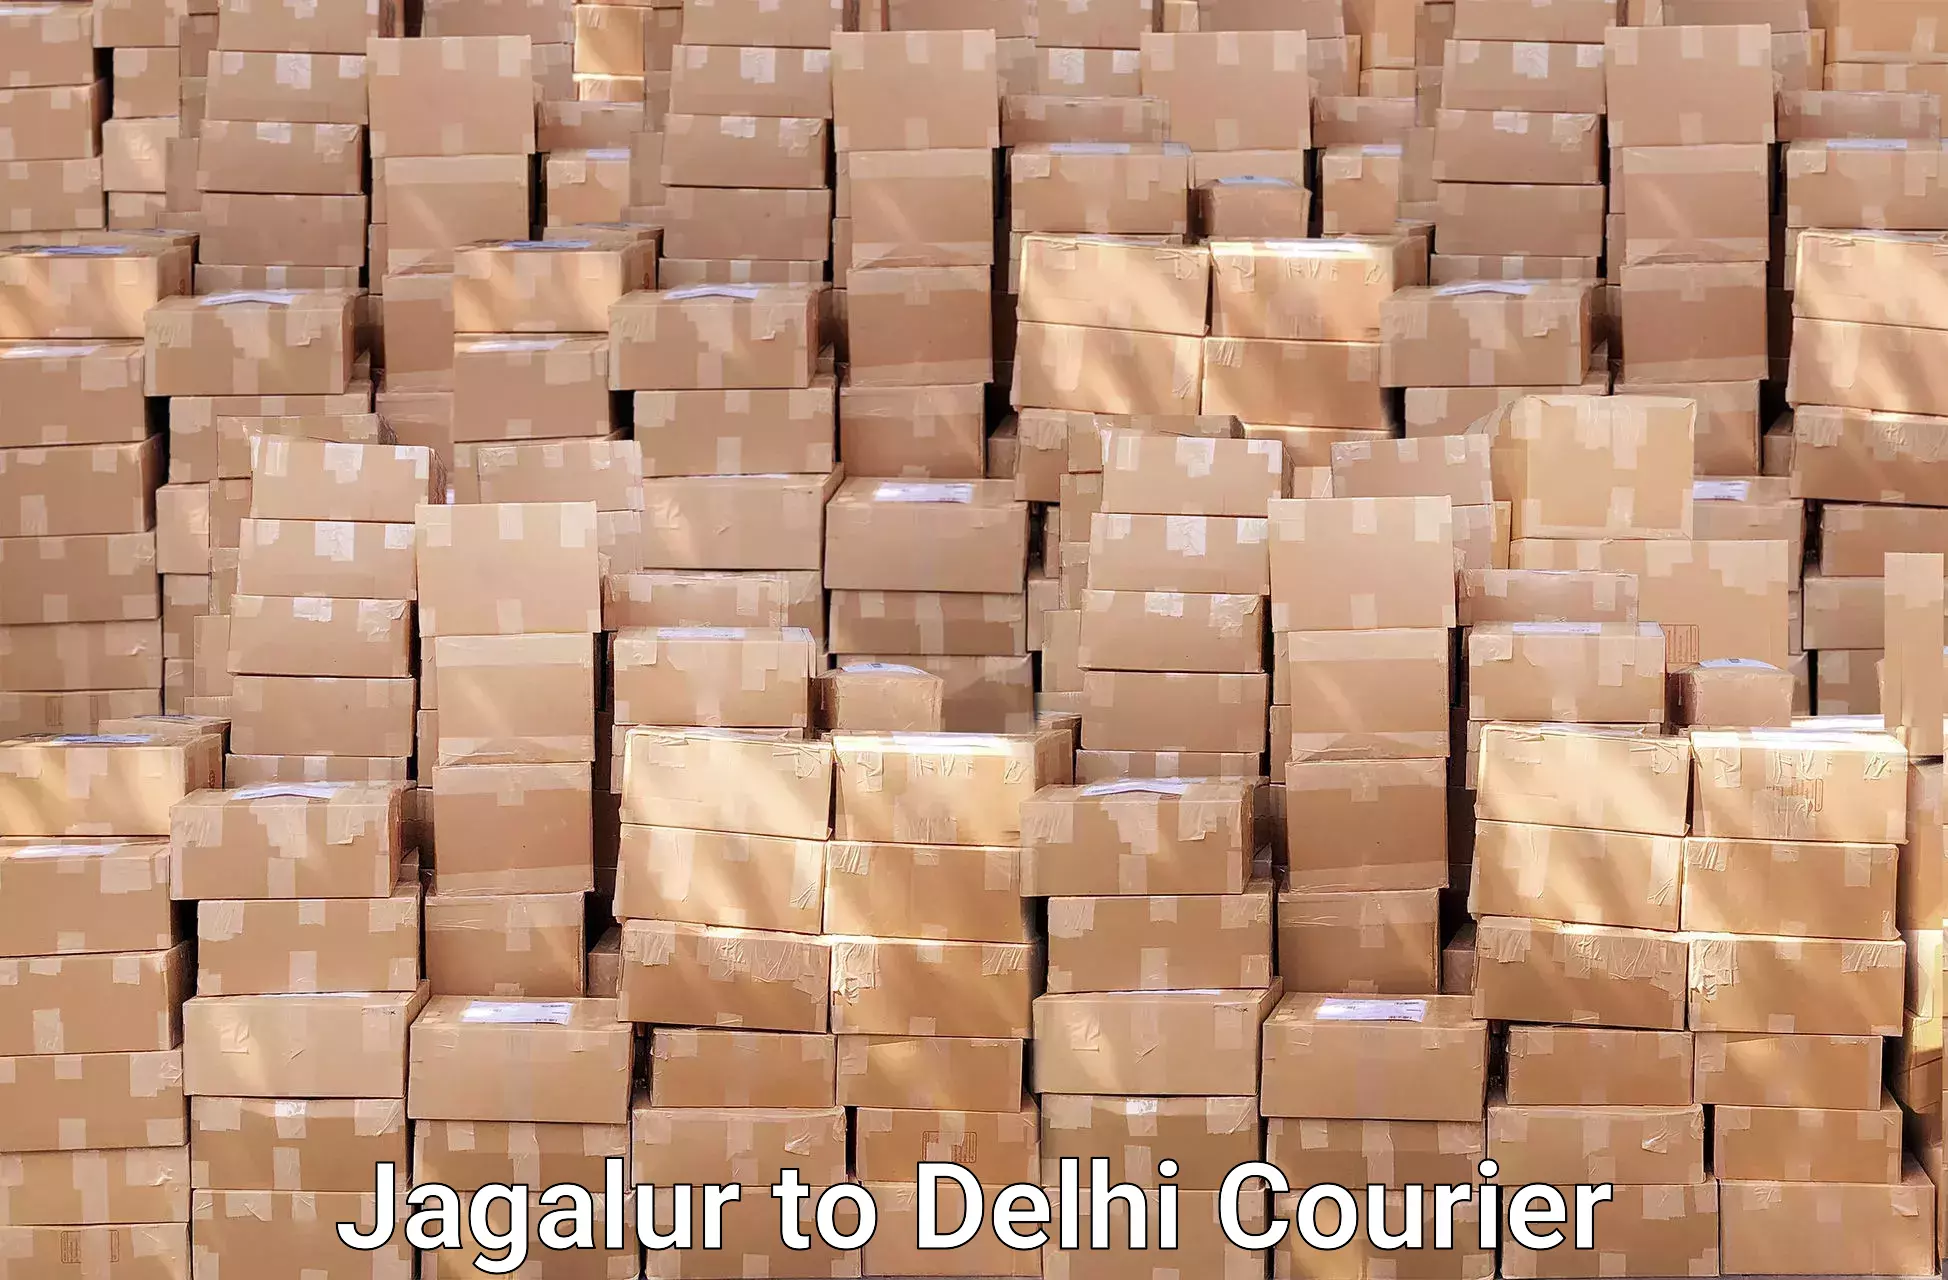 Moving and storage services Jagalur to Sansad Marg